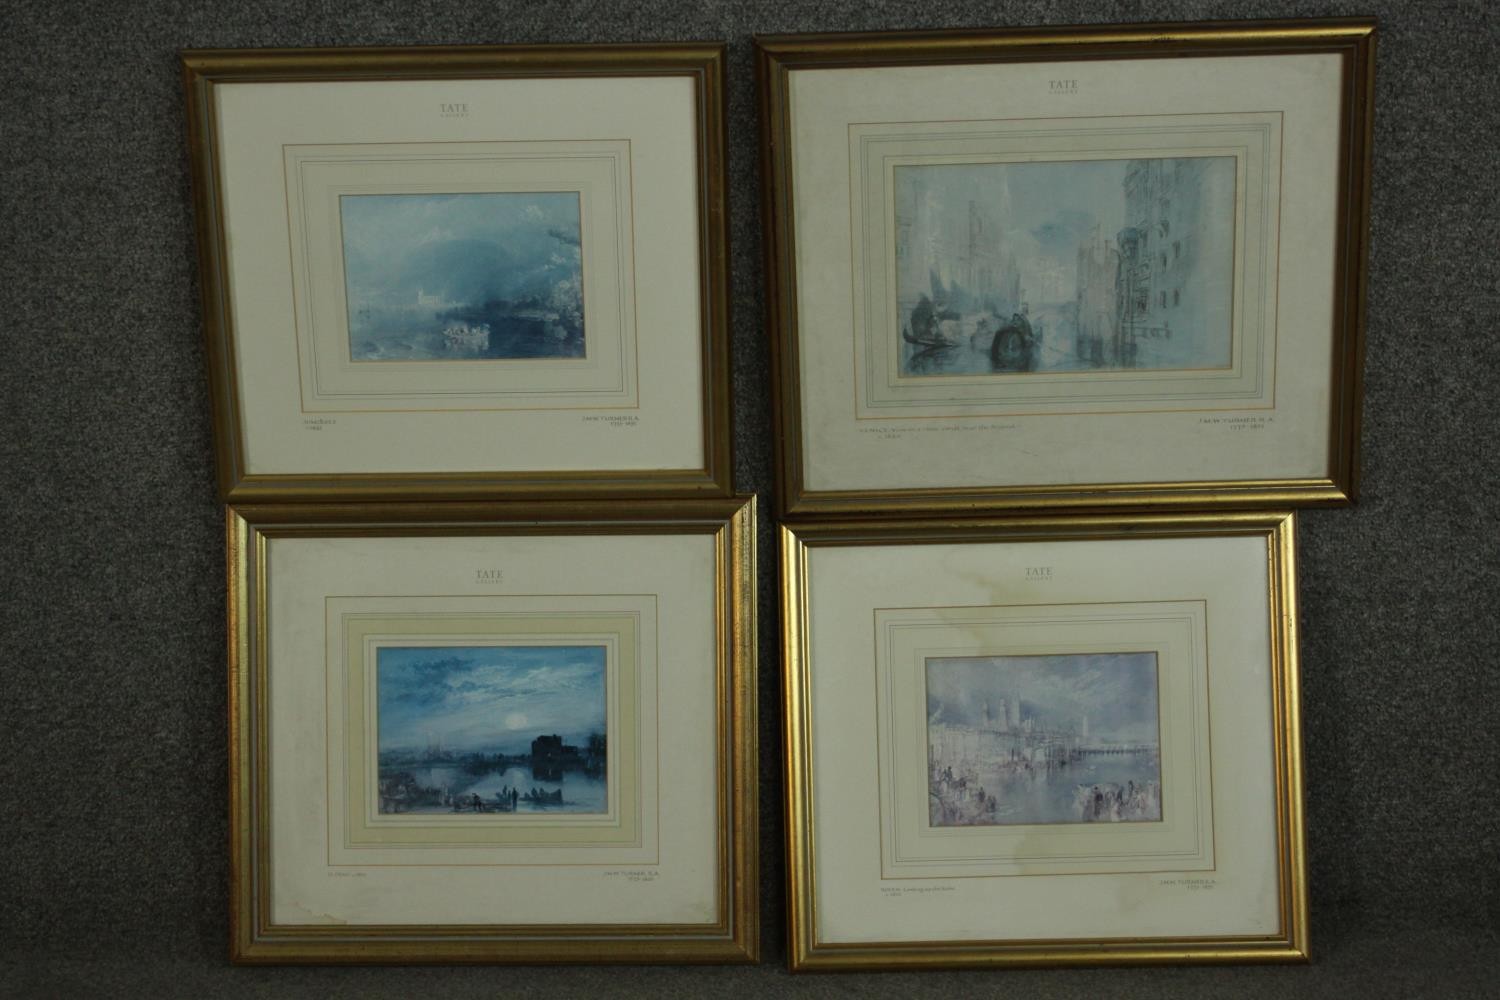 After J.M.W. Turner (1775-1851), four Tate gallery limited edition prints with certificate of